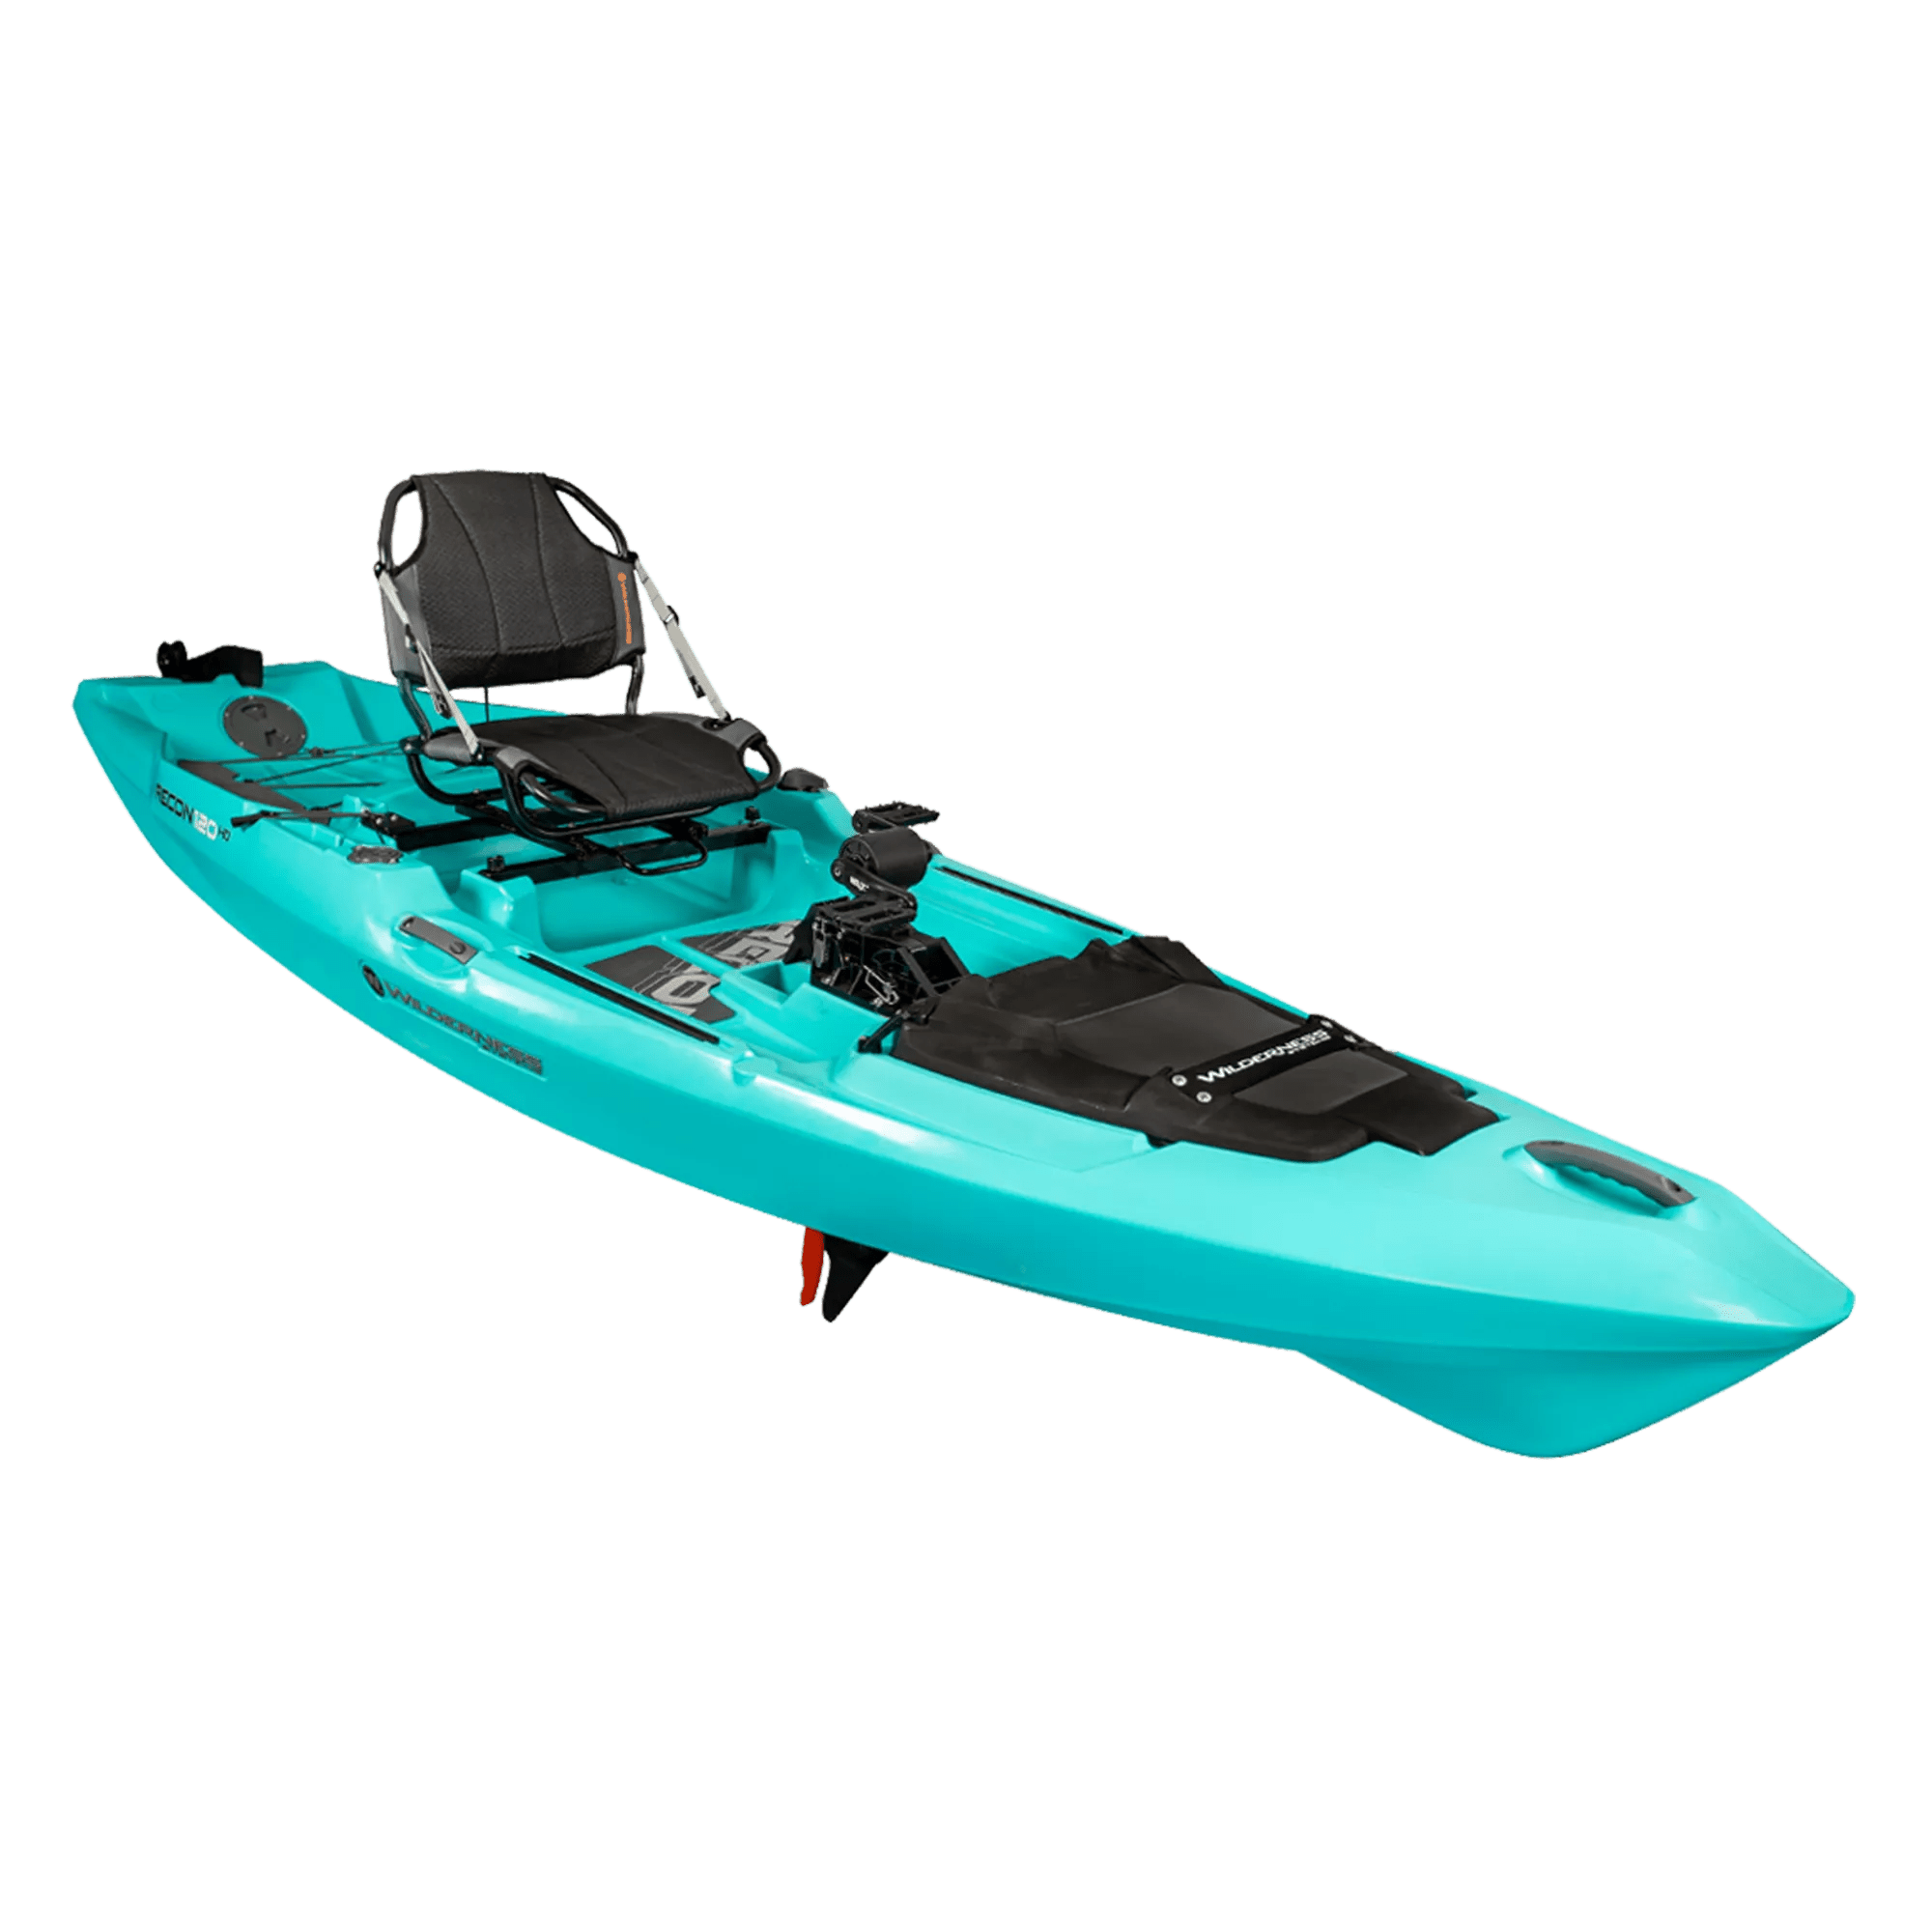 WILDERNESS SYSTEMS - Recon 120 HD Fishing Kayak - Discontinued color/model - Aqua - 9751090192 - ISO 